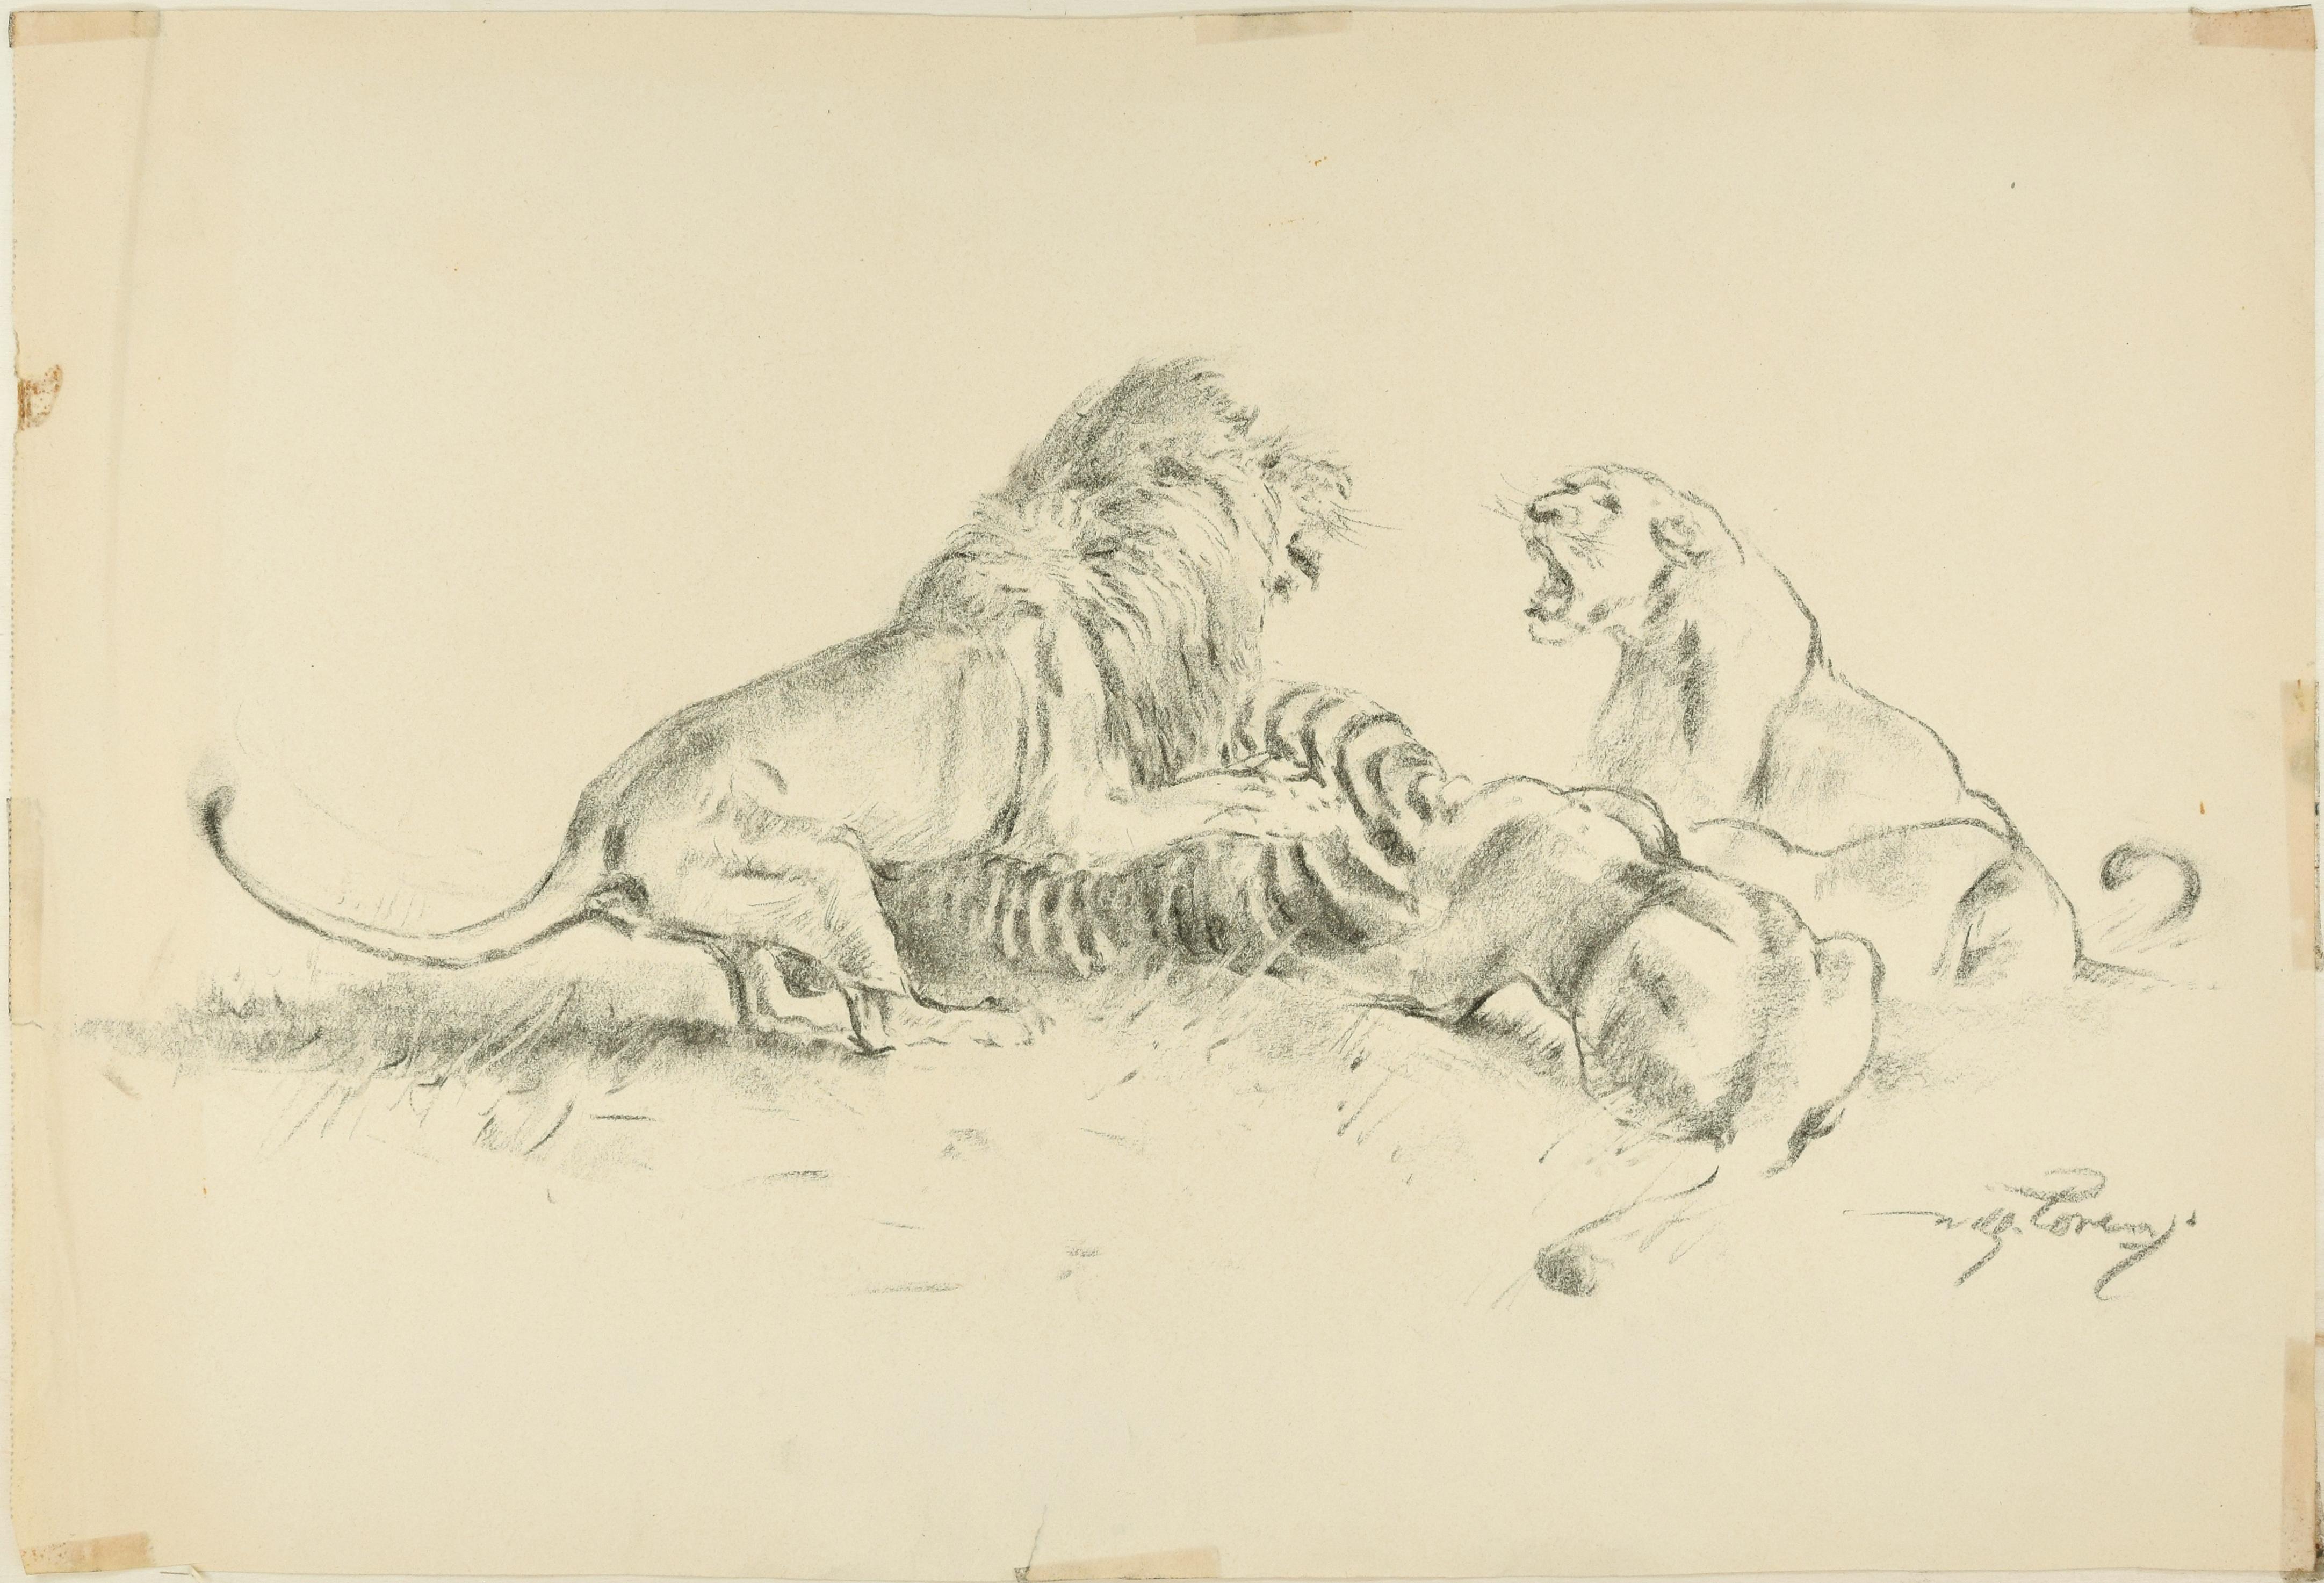 Wilhelm Lorenz Figurative Art - Lions Contending  - Original Charcoal Drawing by Willy Lorenz - Mid 20th Century